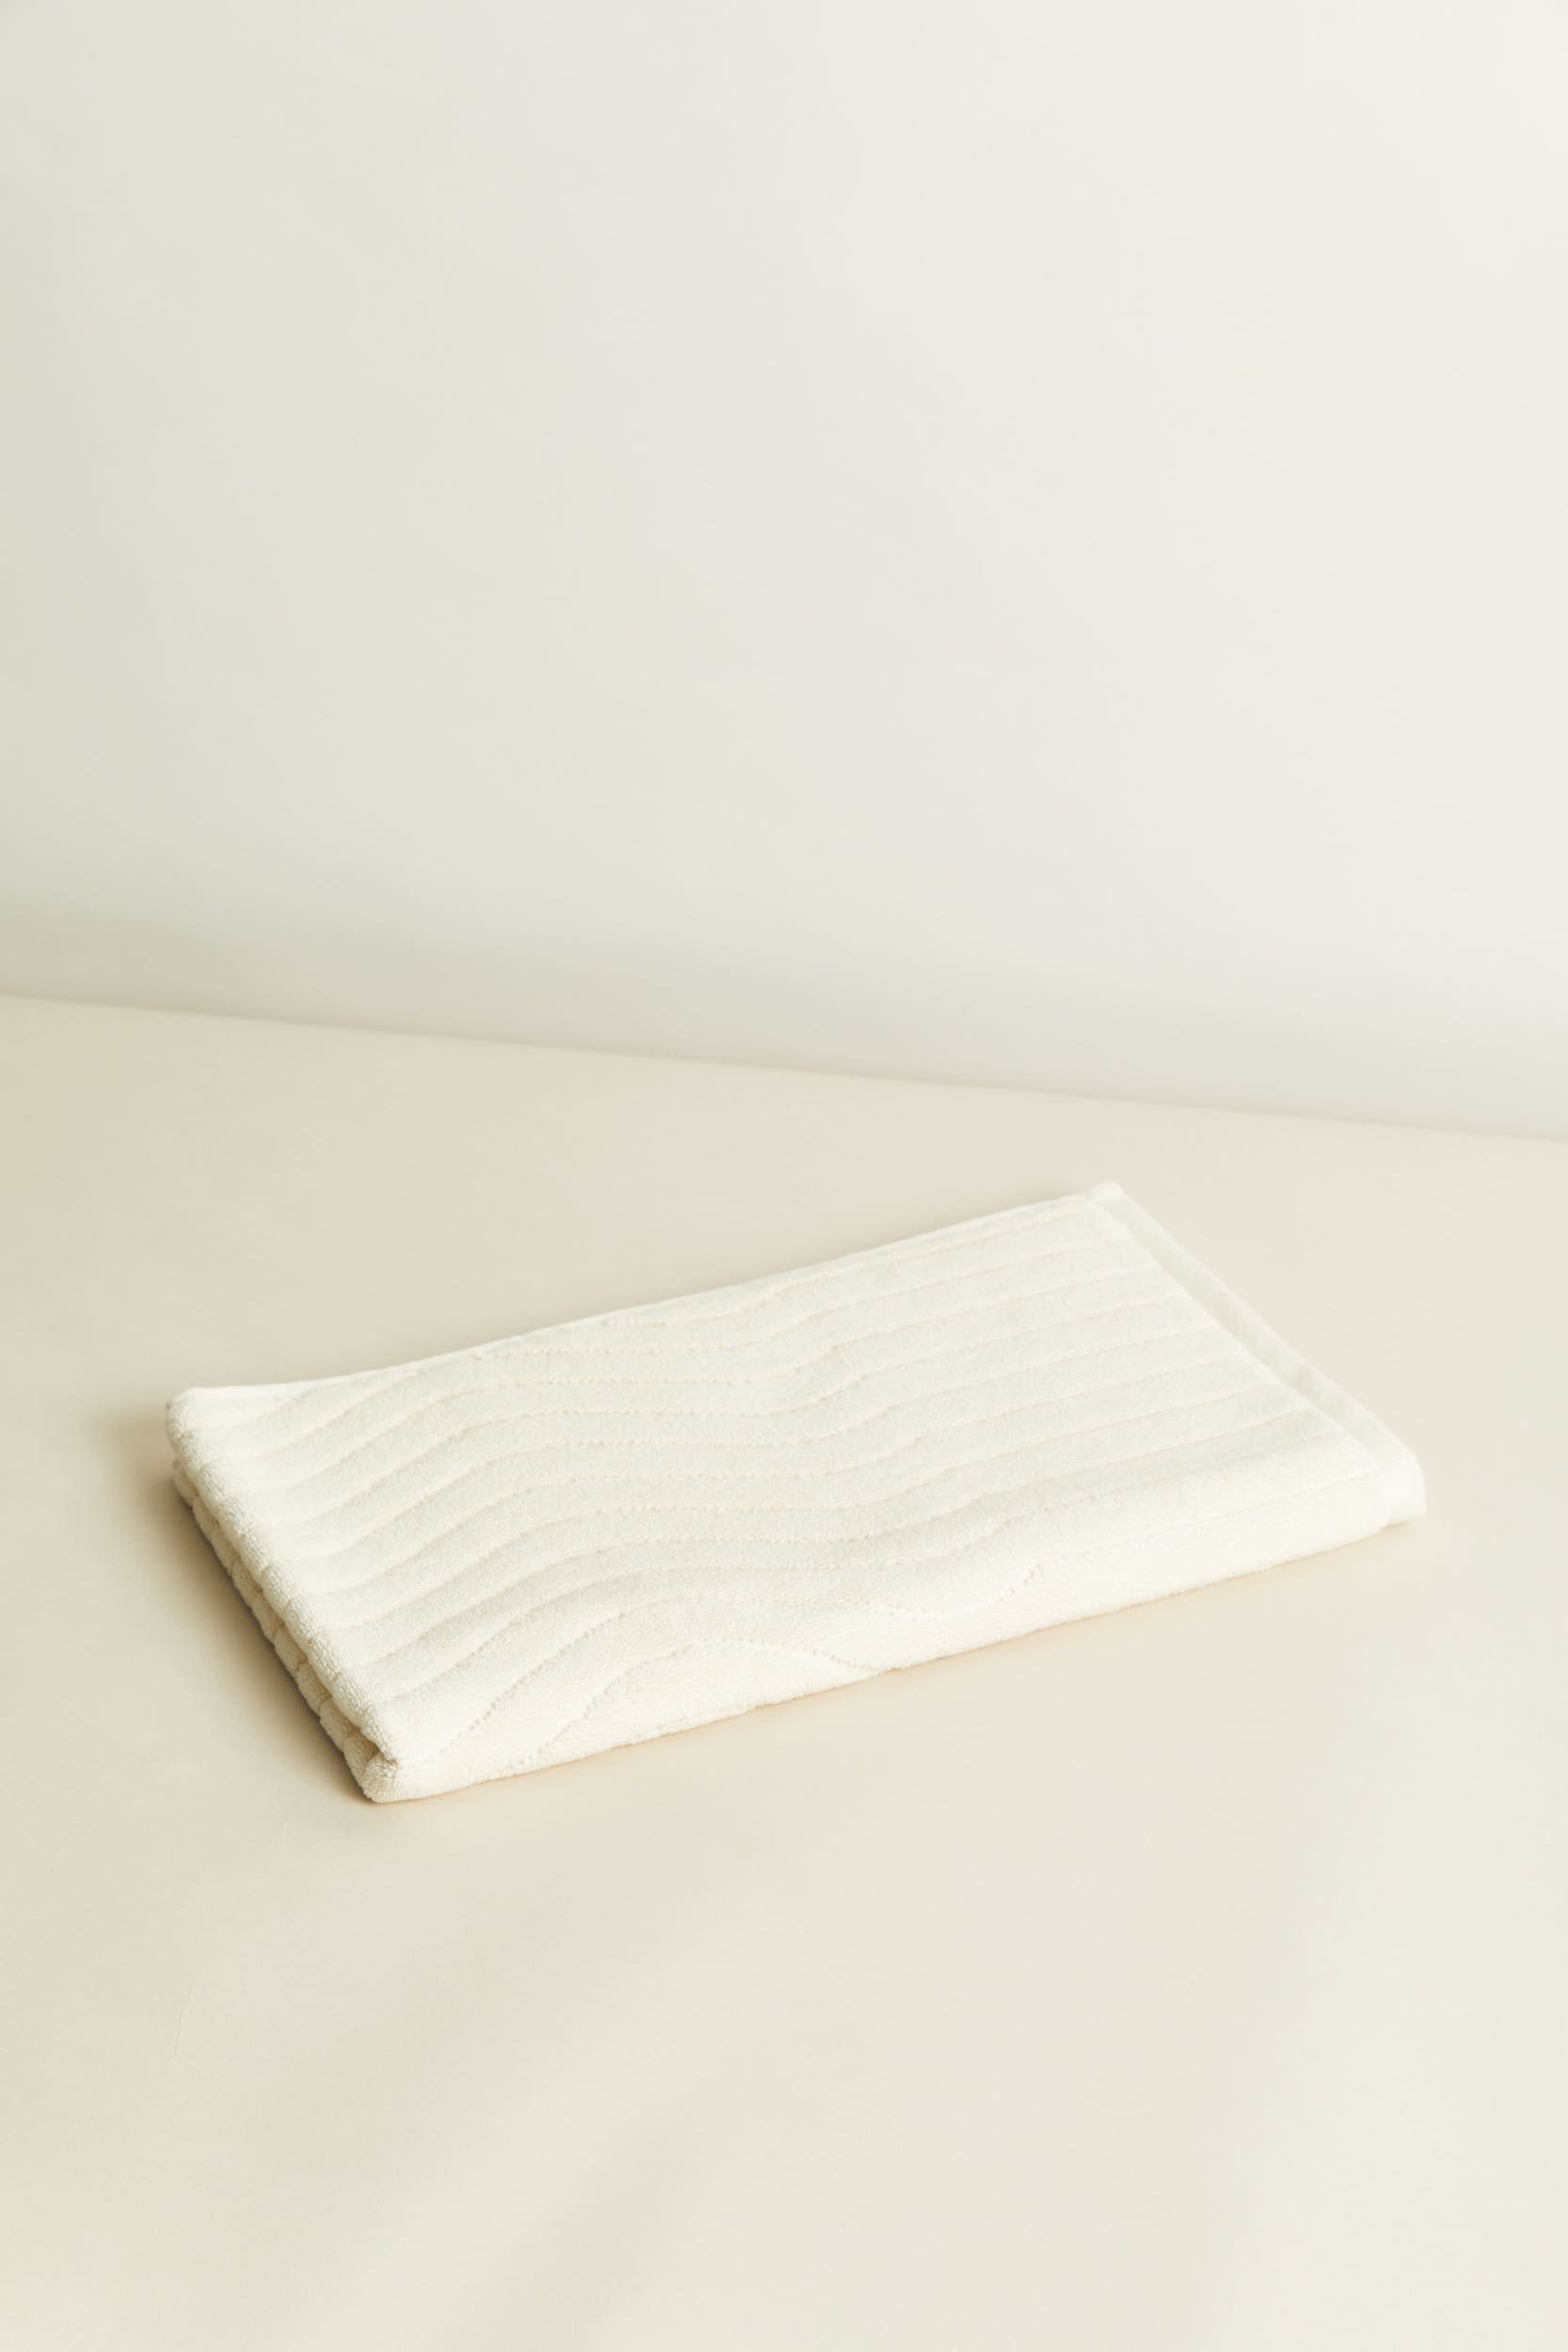 Erye Organic Cotton Bath Mat in ivory. An elevated, everyday bathroom essential with a unique textural pattern reminiscent of movement over skimmed water. Luxuriously soft, 100% organic cotton hand.